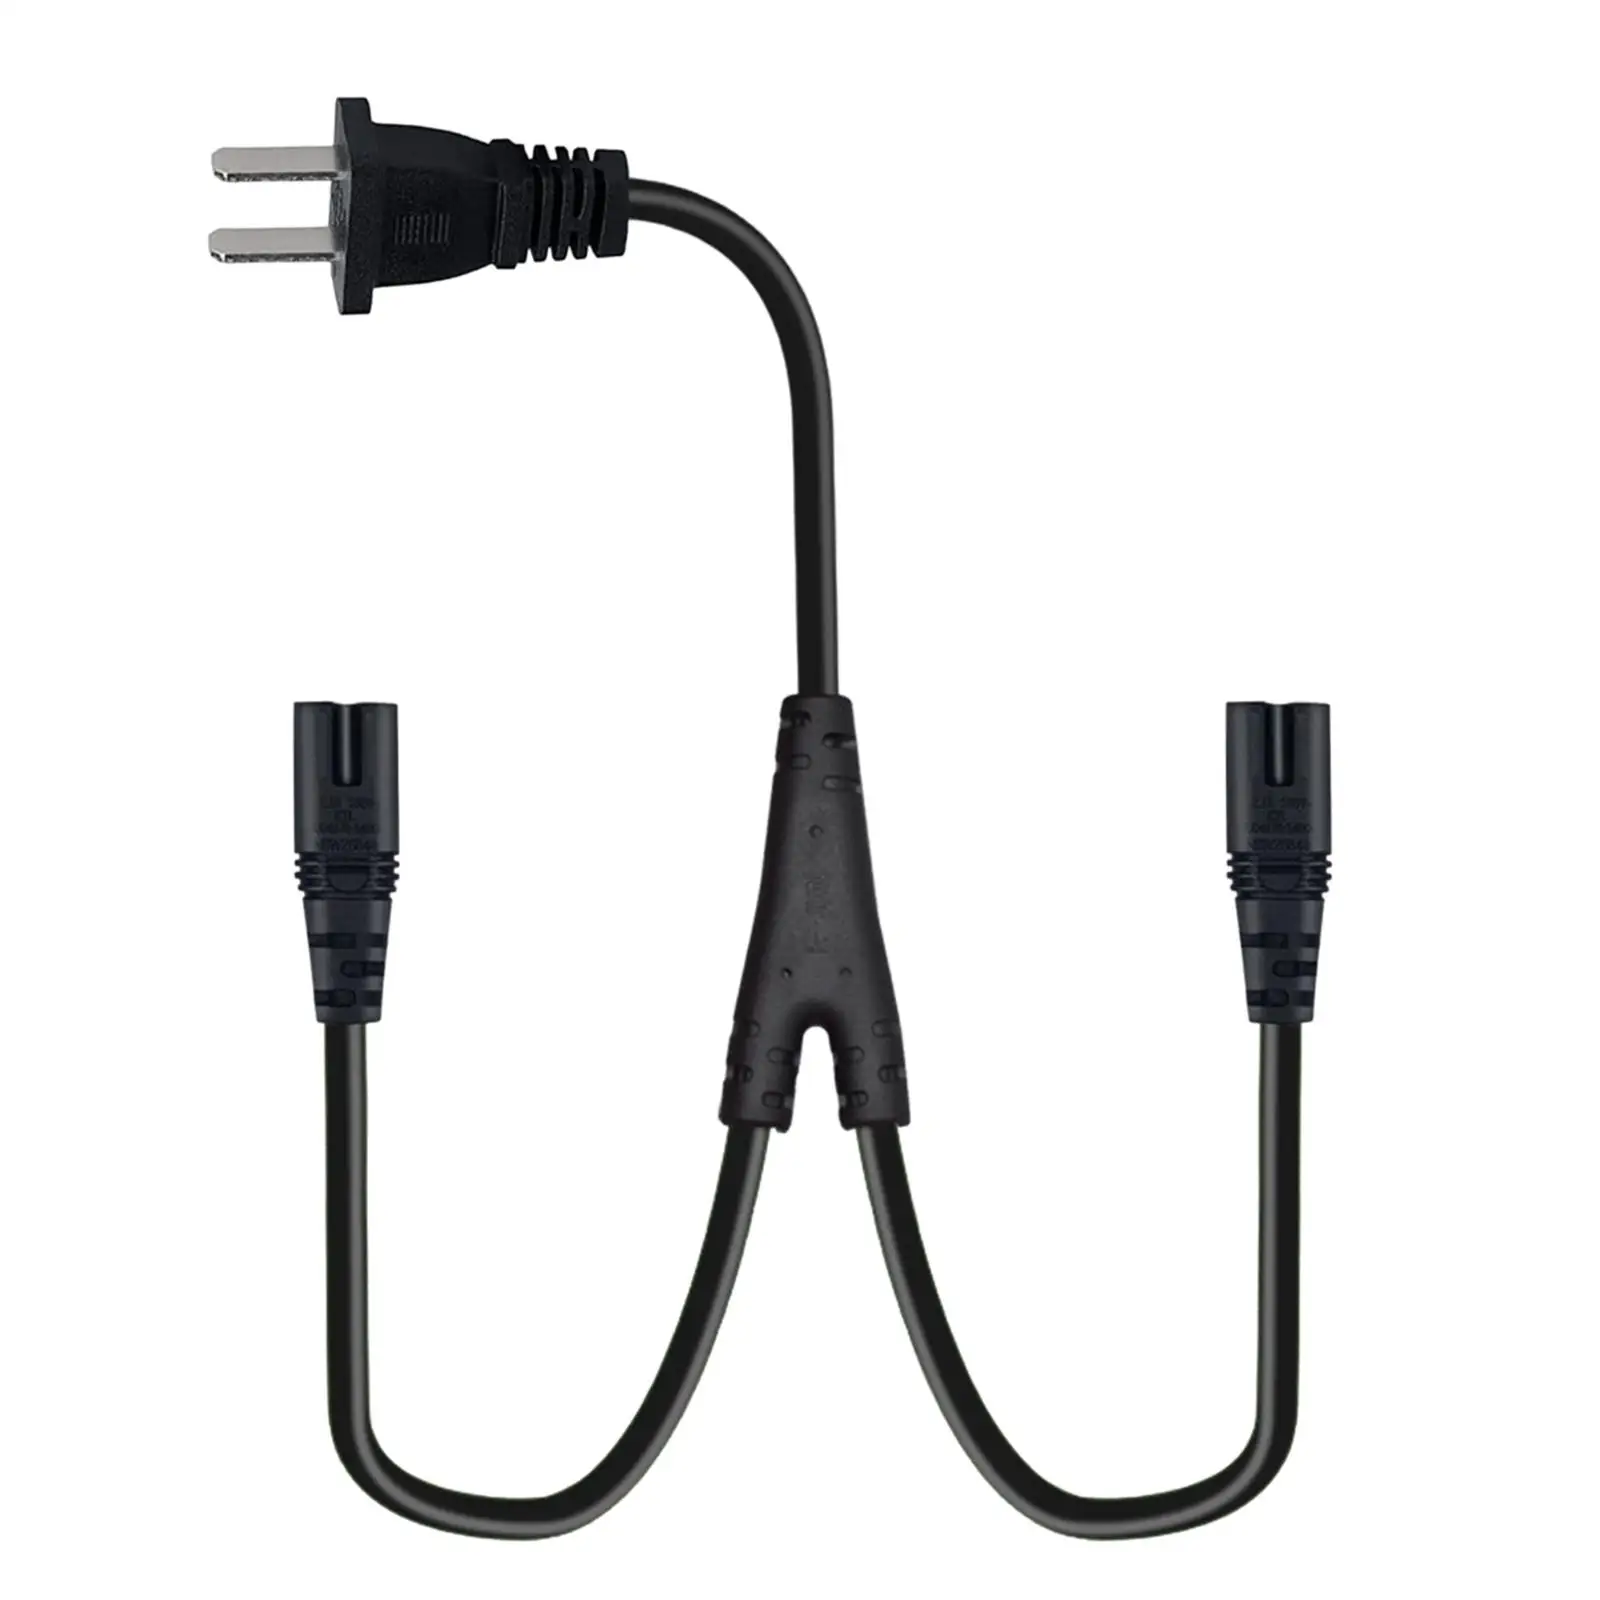 2 Straight Pins Connector to C7 Power Cord Cable 1.8M Easily Install Durable  cessory Direct Repl es ,Bl k Professional